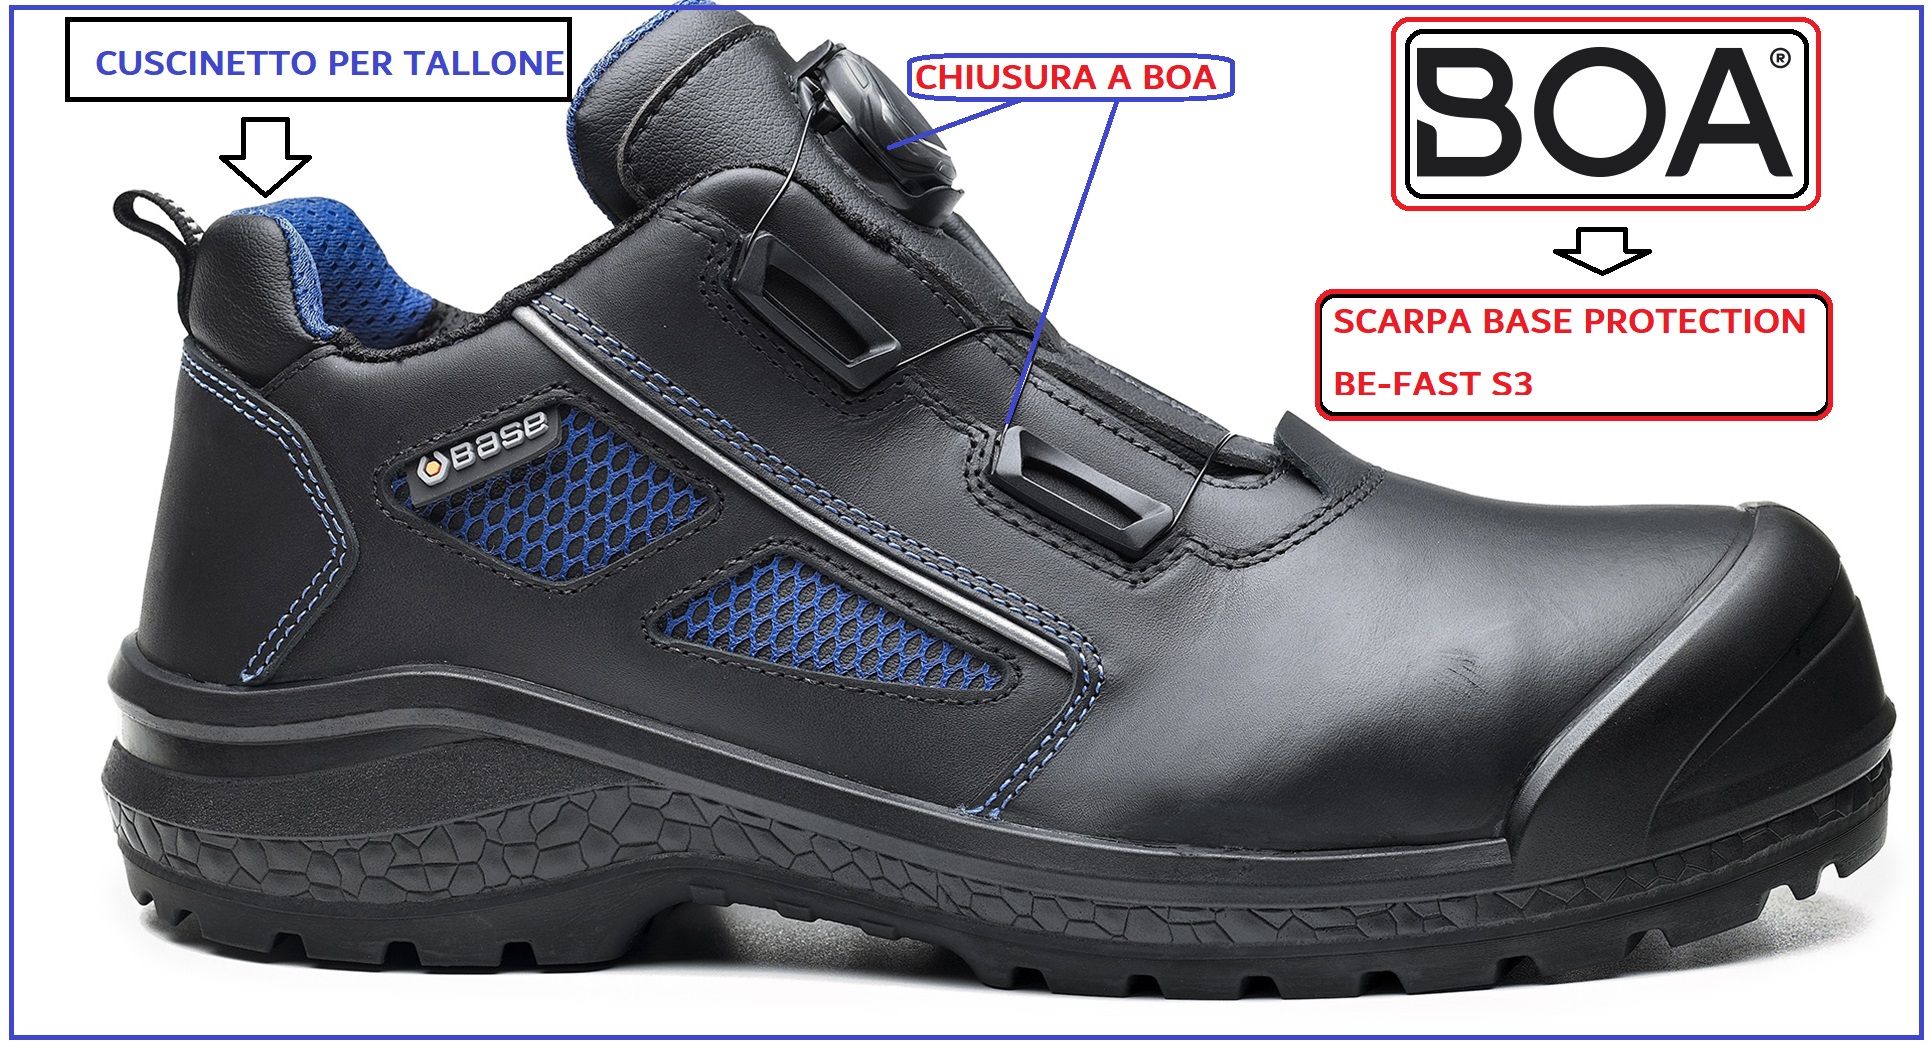 SCARPA BASE PROTECTION BE FAST